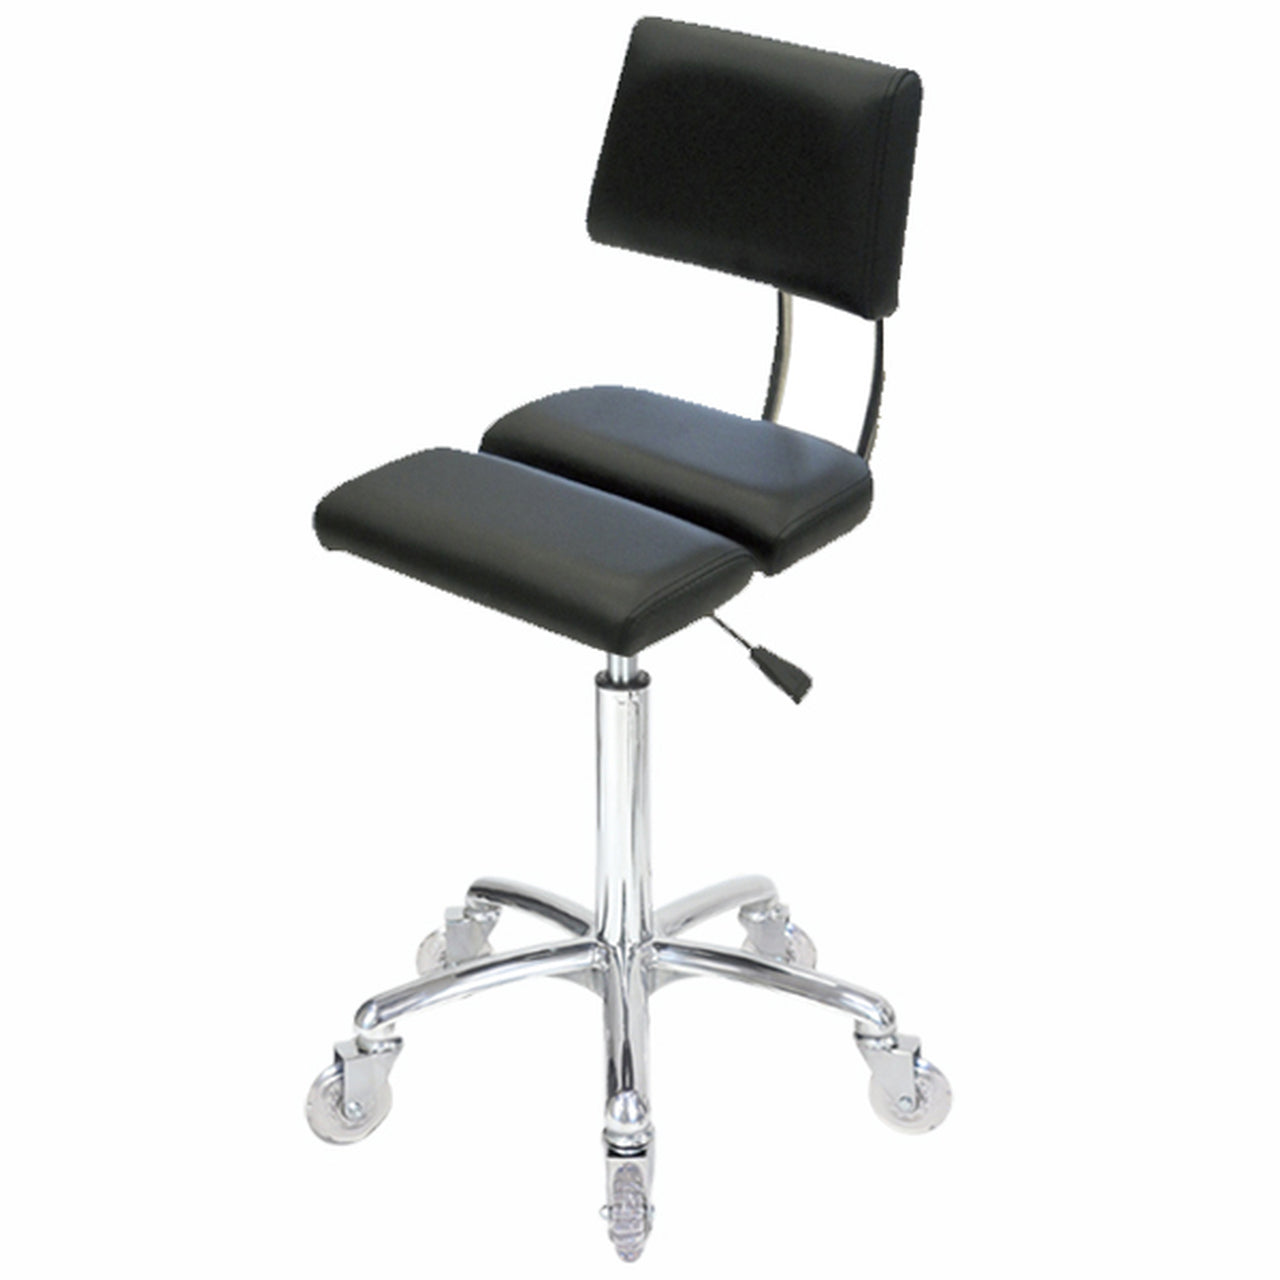 Joiken Dove Stool with Clear Wheels Black upholstery chrome base